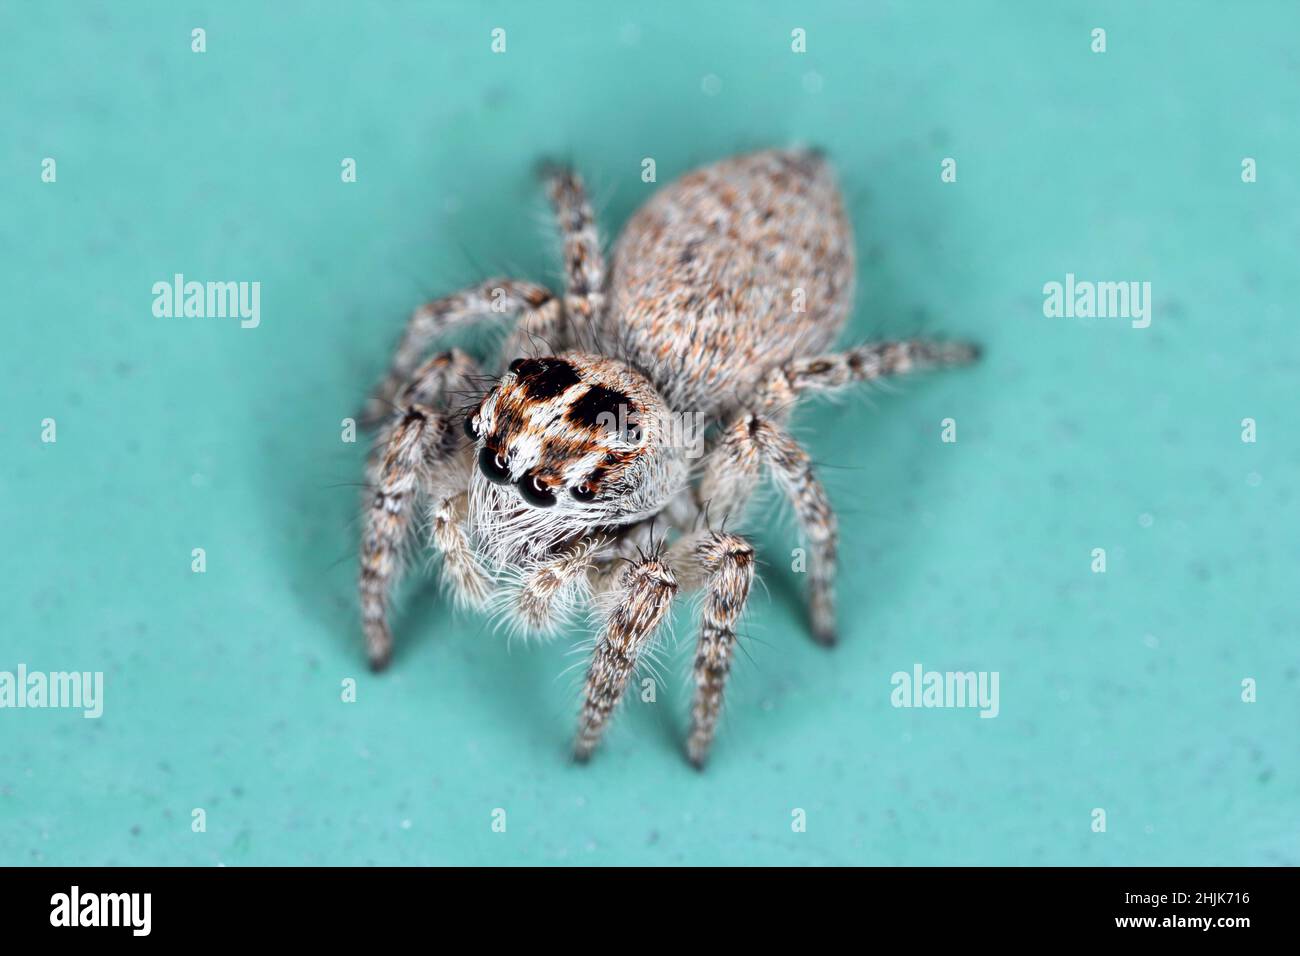 Super macro image of Jumping spider - Salticidae at high magnification.This wildlife spider from Croatia. Take image with macro equipment. Stock Photo